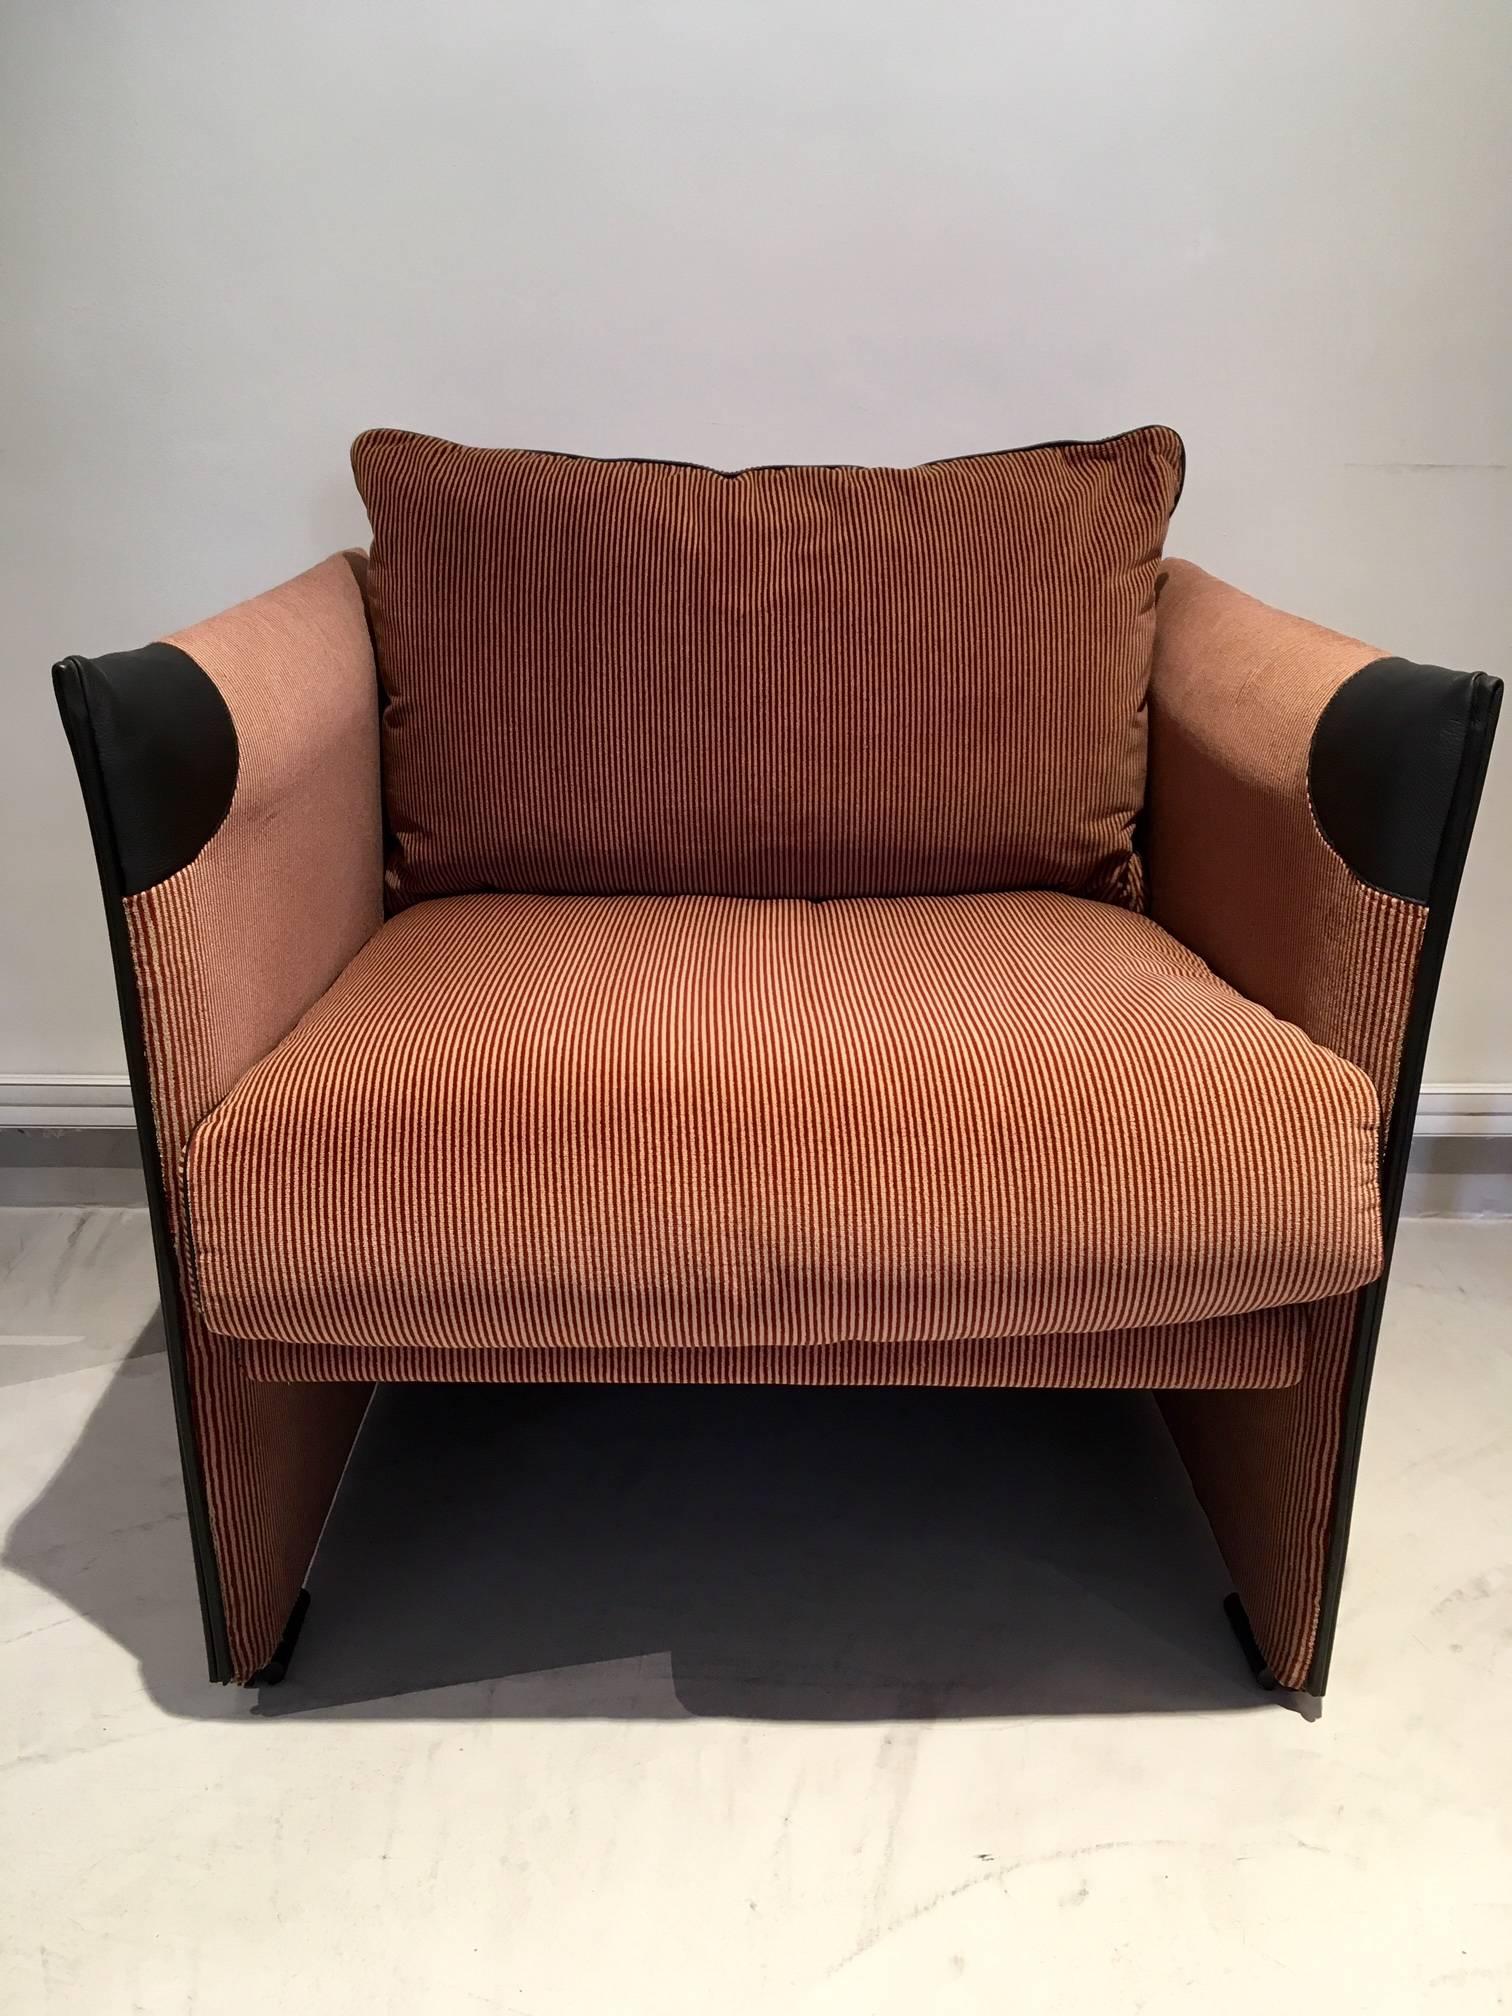 Very comfortable lounge chair by renowned Italian designer Mario Bellini for Cassina. Upholstered in striped velvet fabric with black leather and zipper details. Loose seat cushion filled with down feathers. Marked 